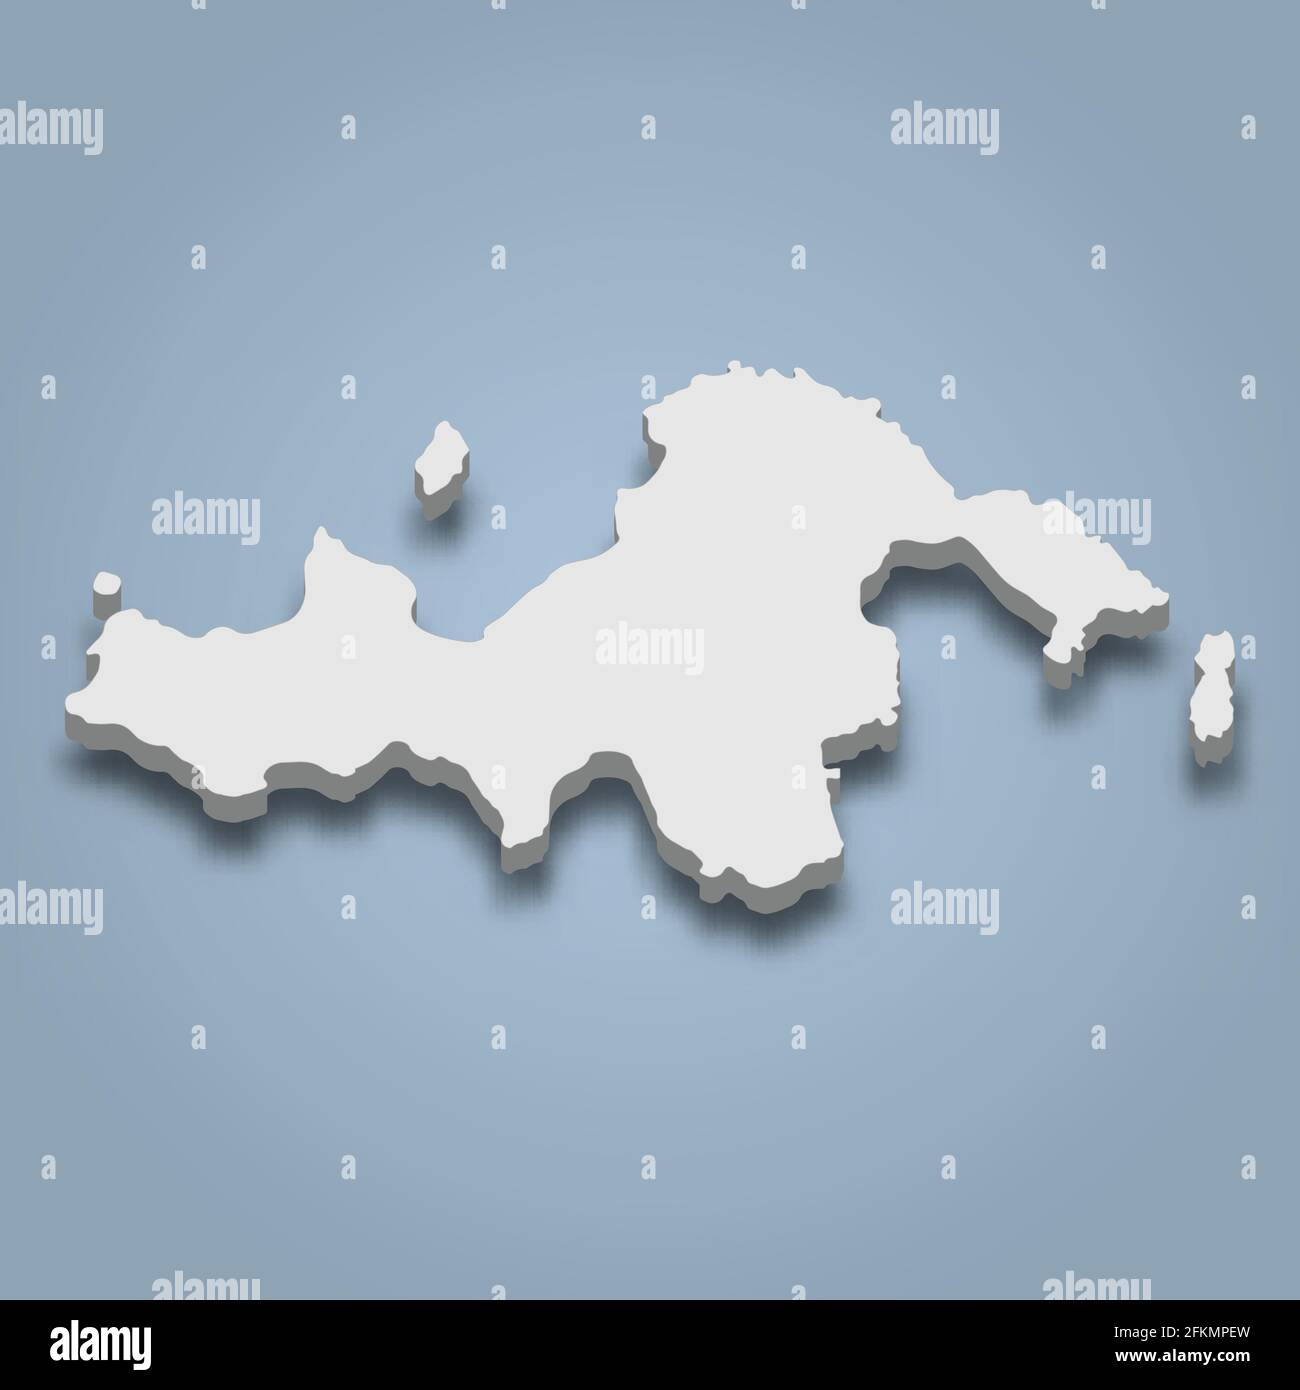 3d isometric map of Thomas is an island in Whitsunday Islands, isolaated vector illustration Stock Vector